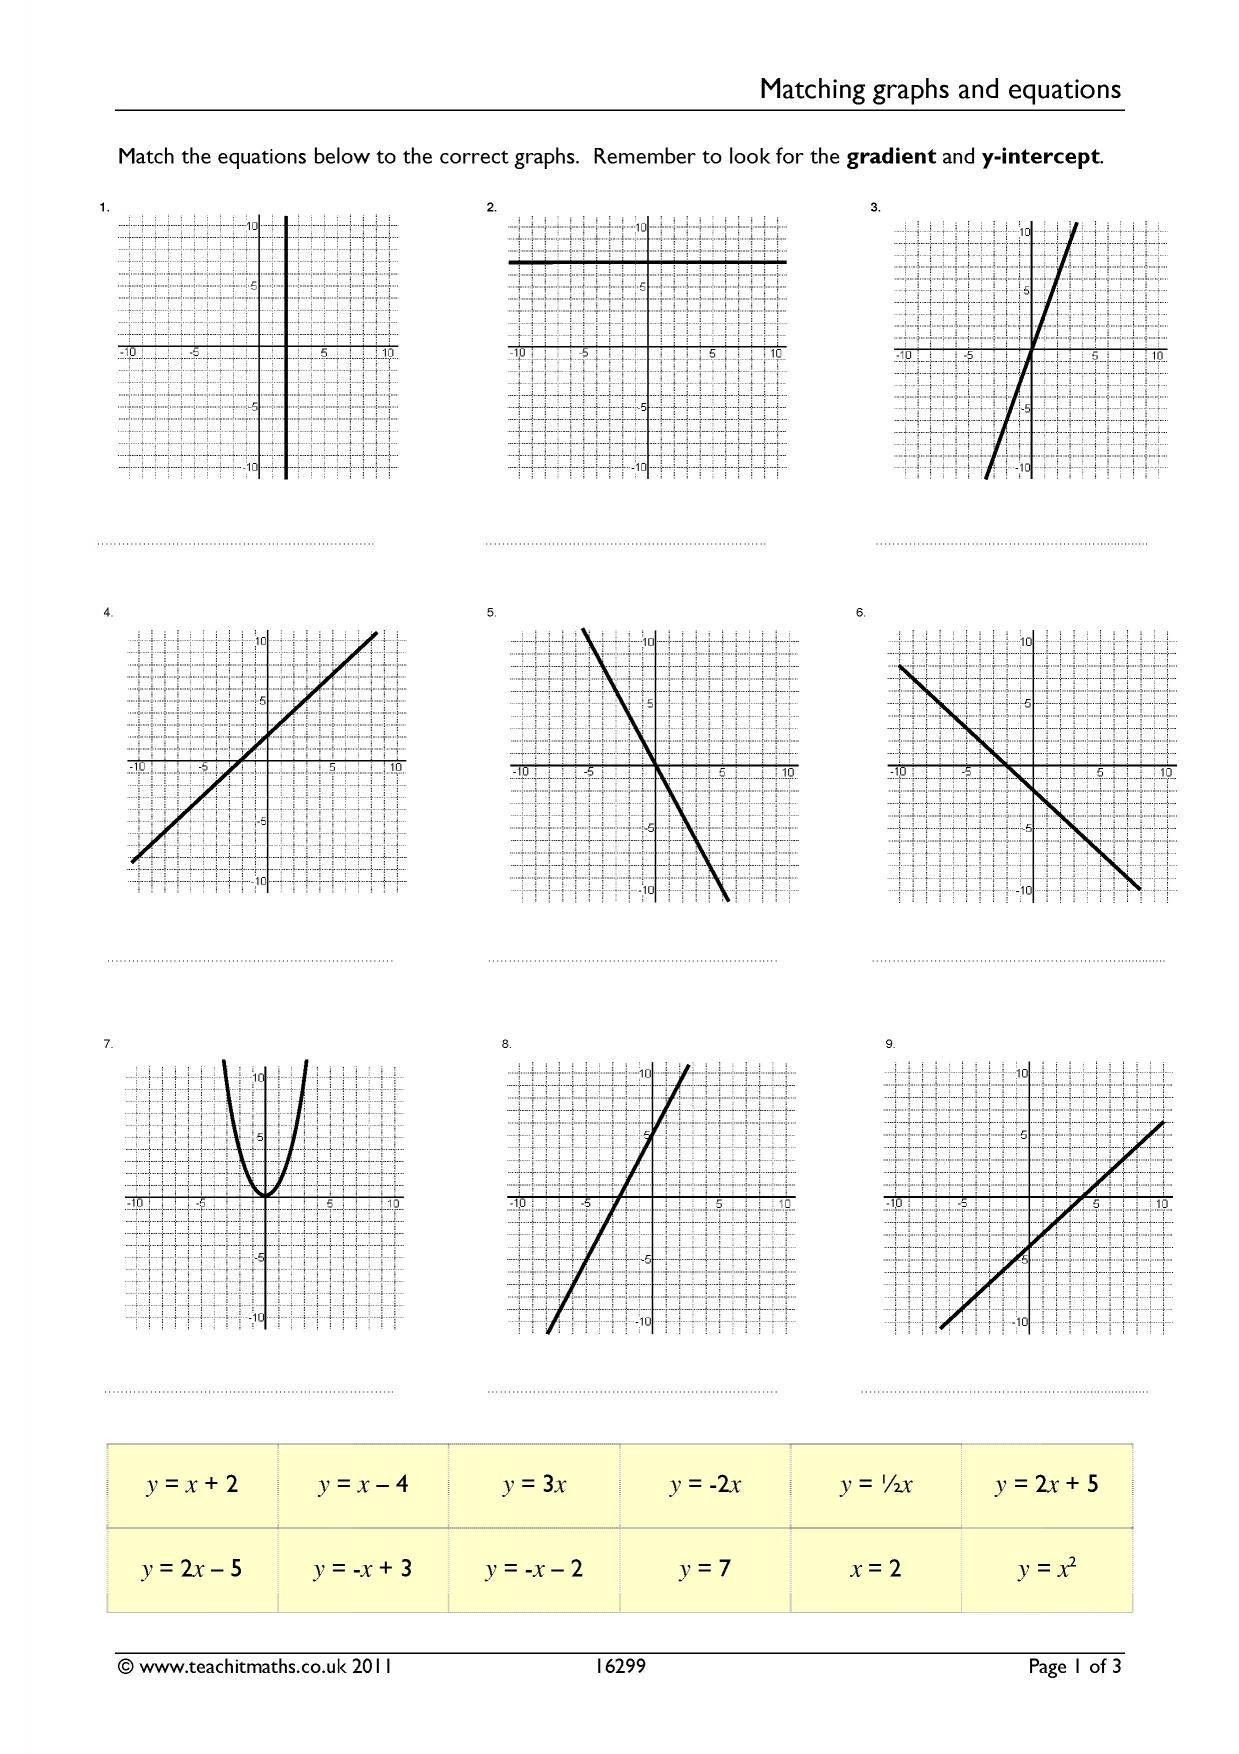 Graphing Linear Equations Worksheet Pdf Matching Graphs and Linear Equations Differentiated Worksheet